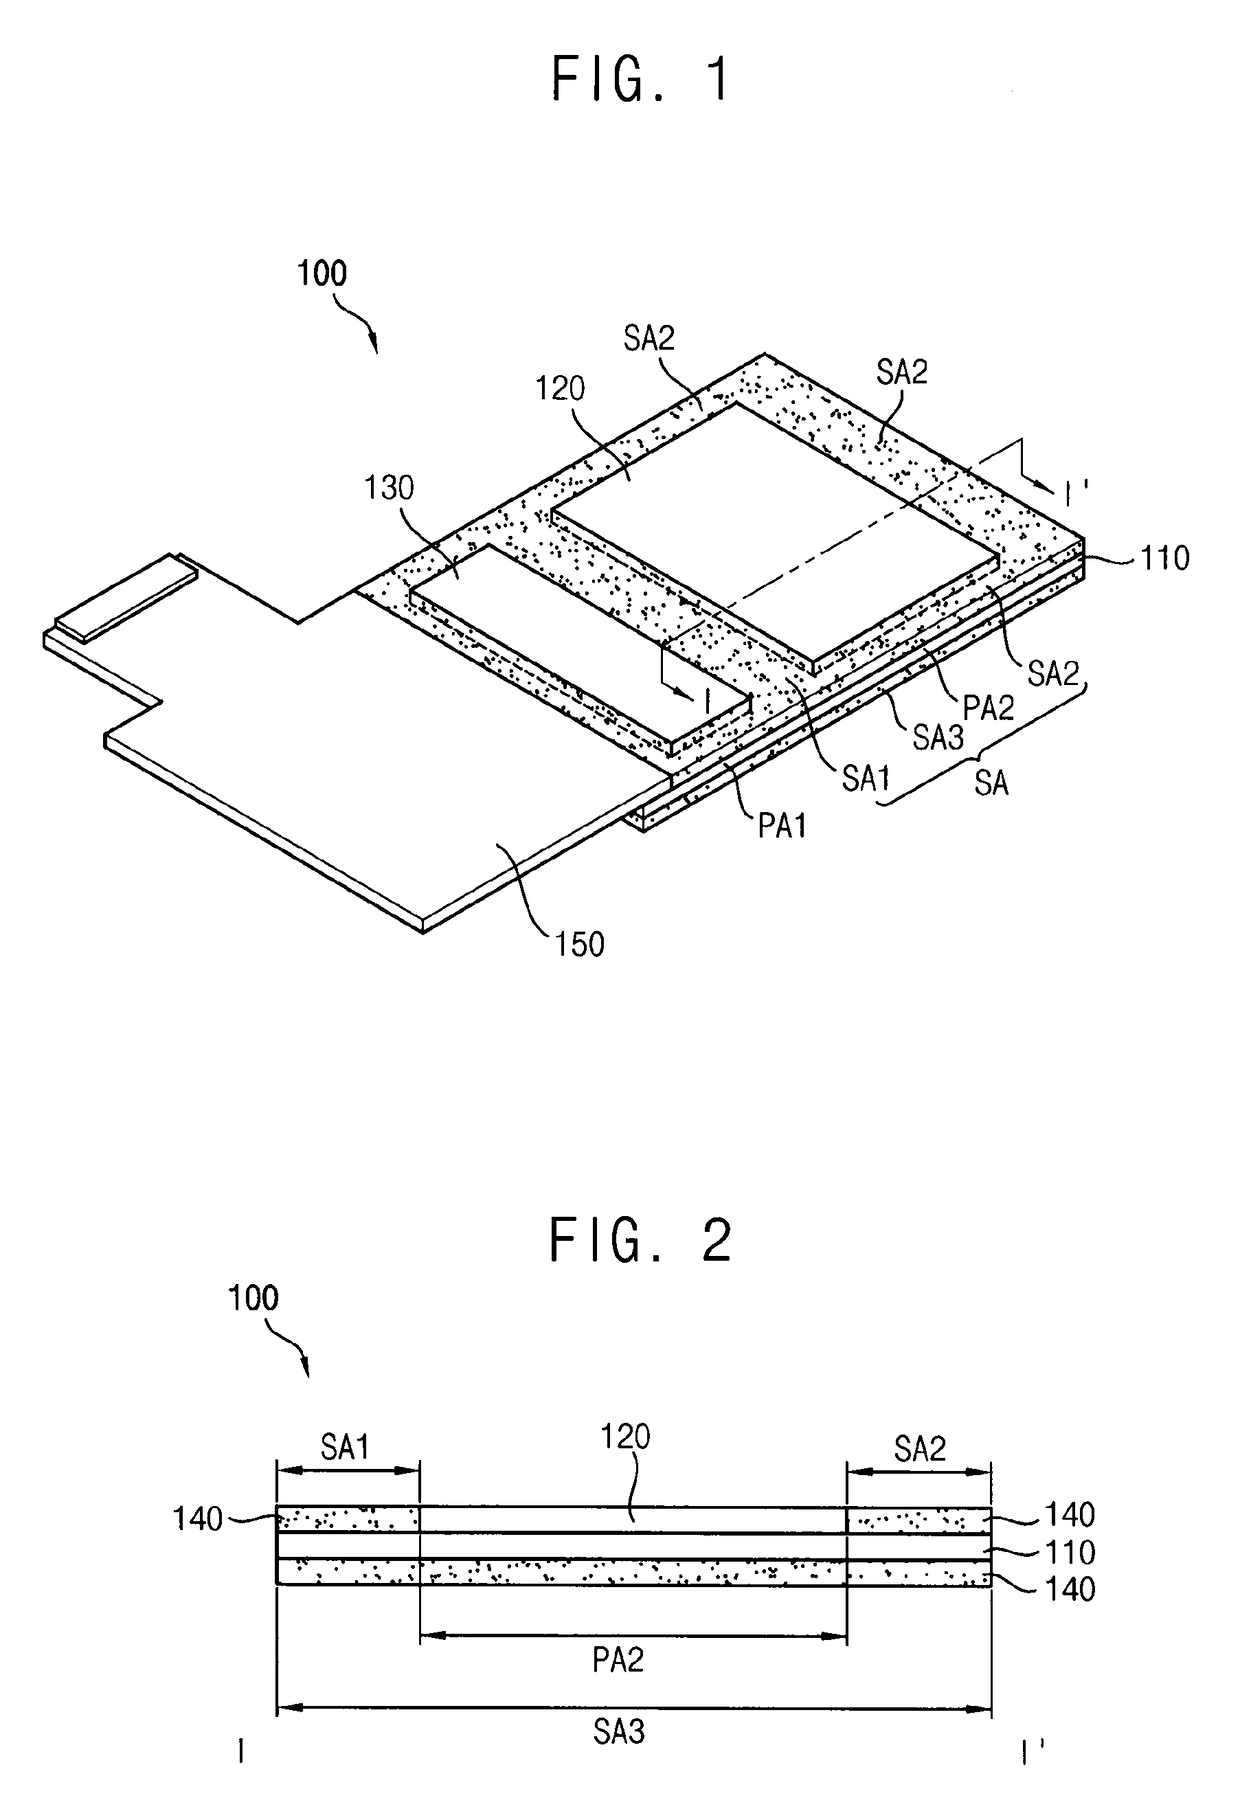 Display device and a method of measuring a strain of the display device